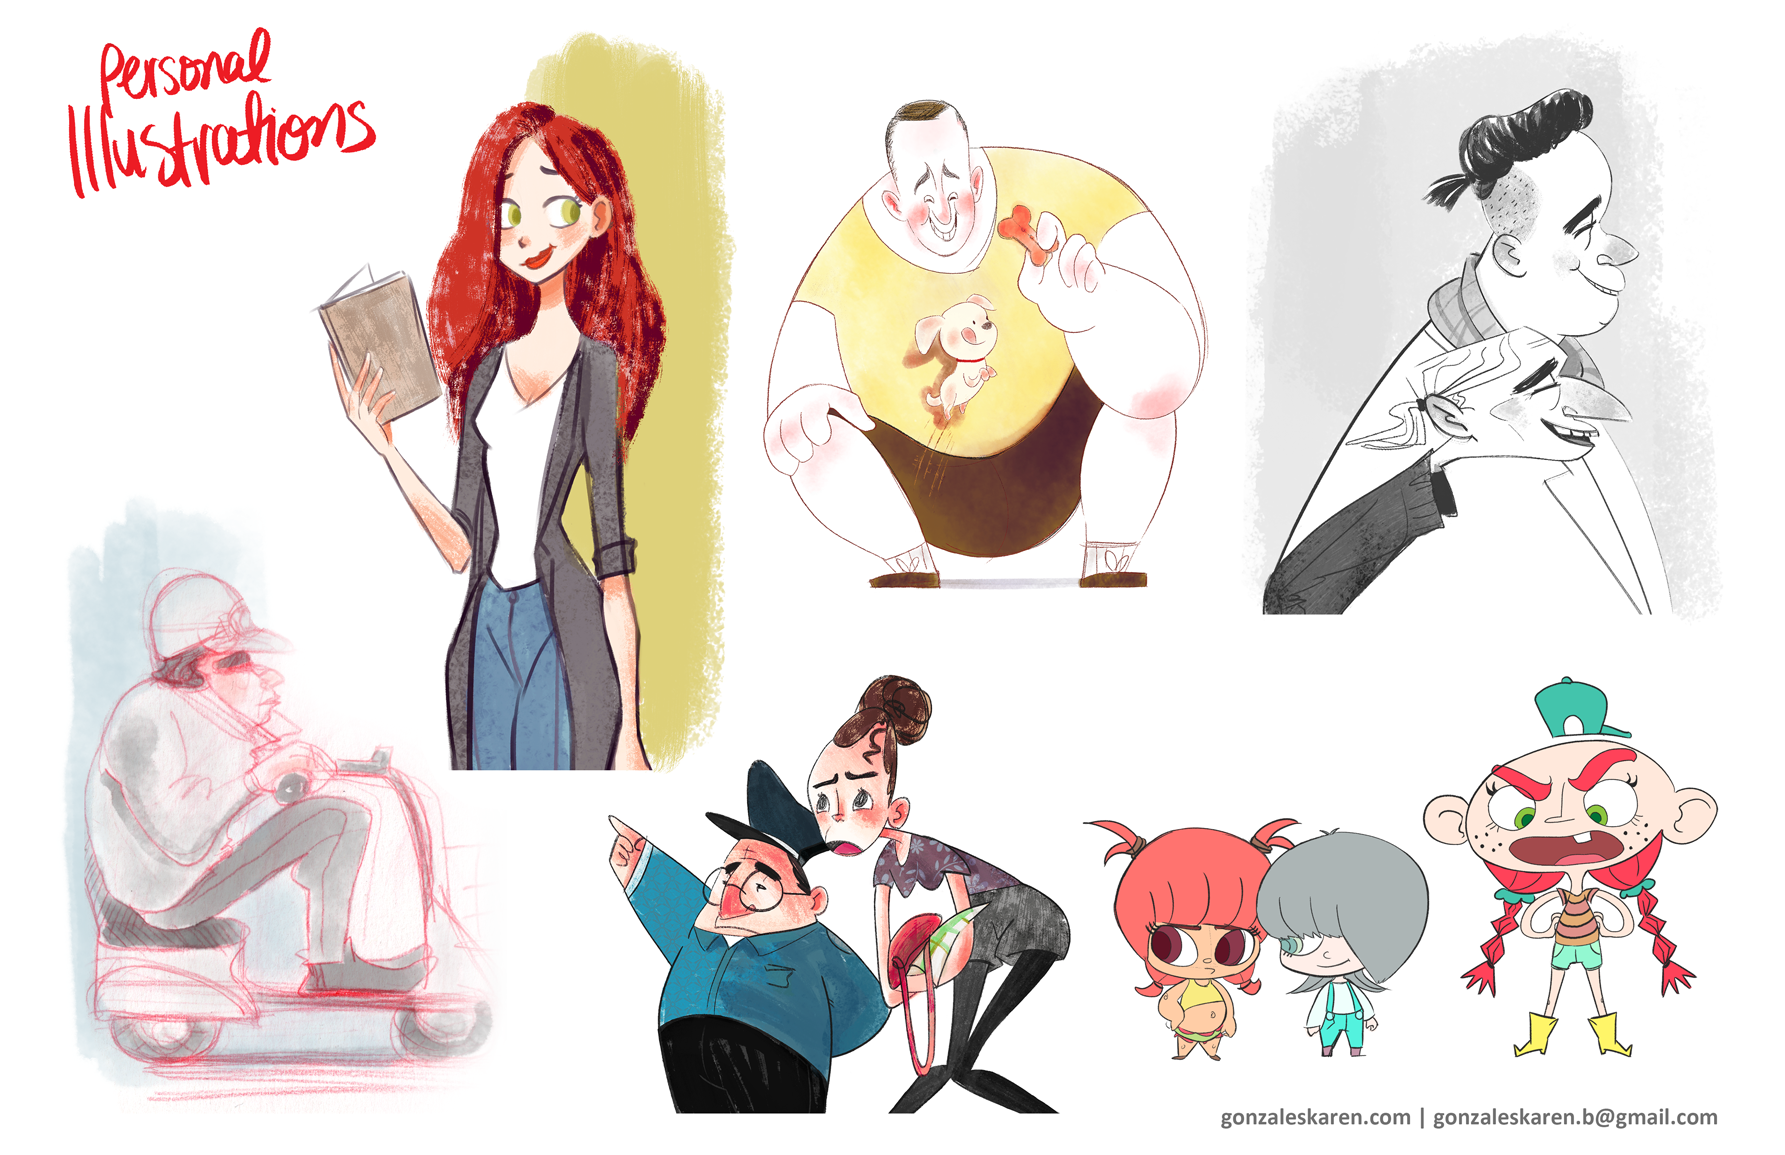  Character illustrations - Personal. 